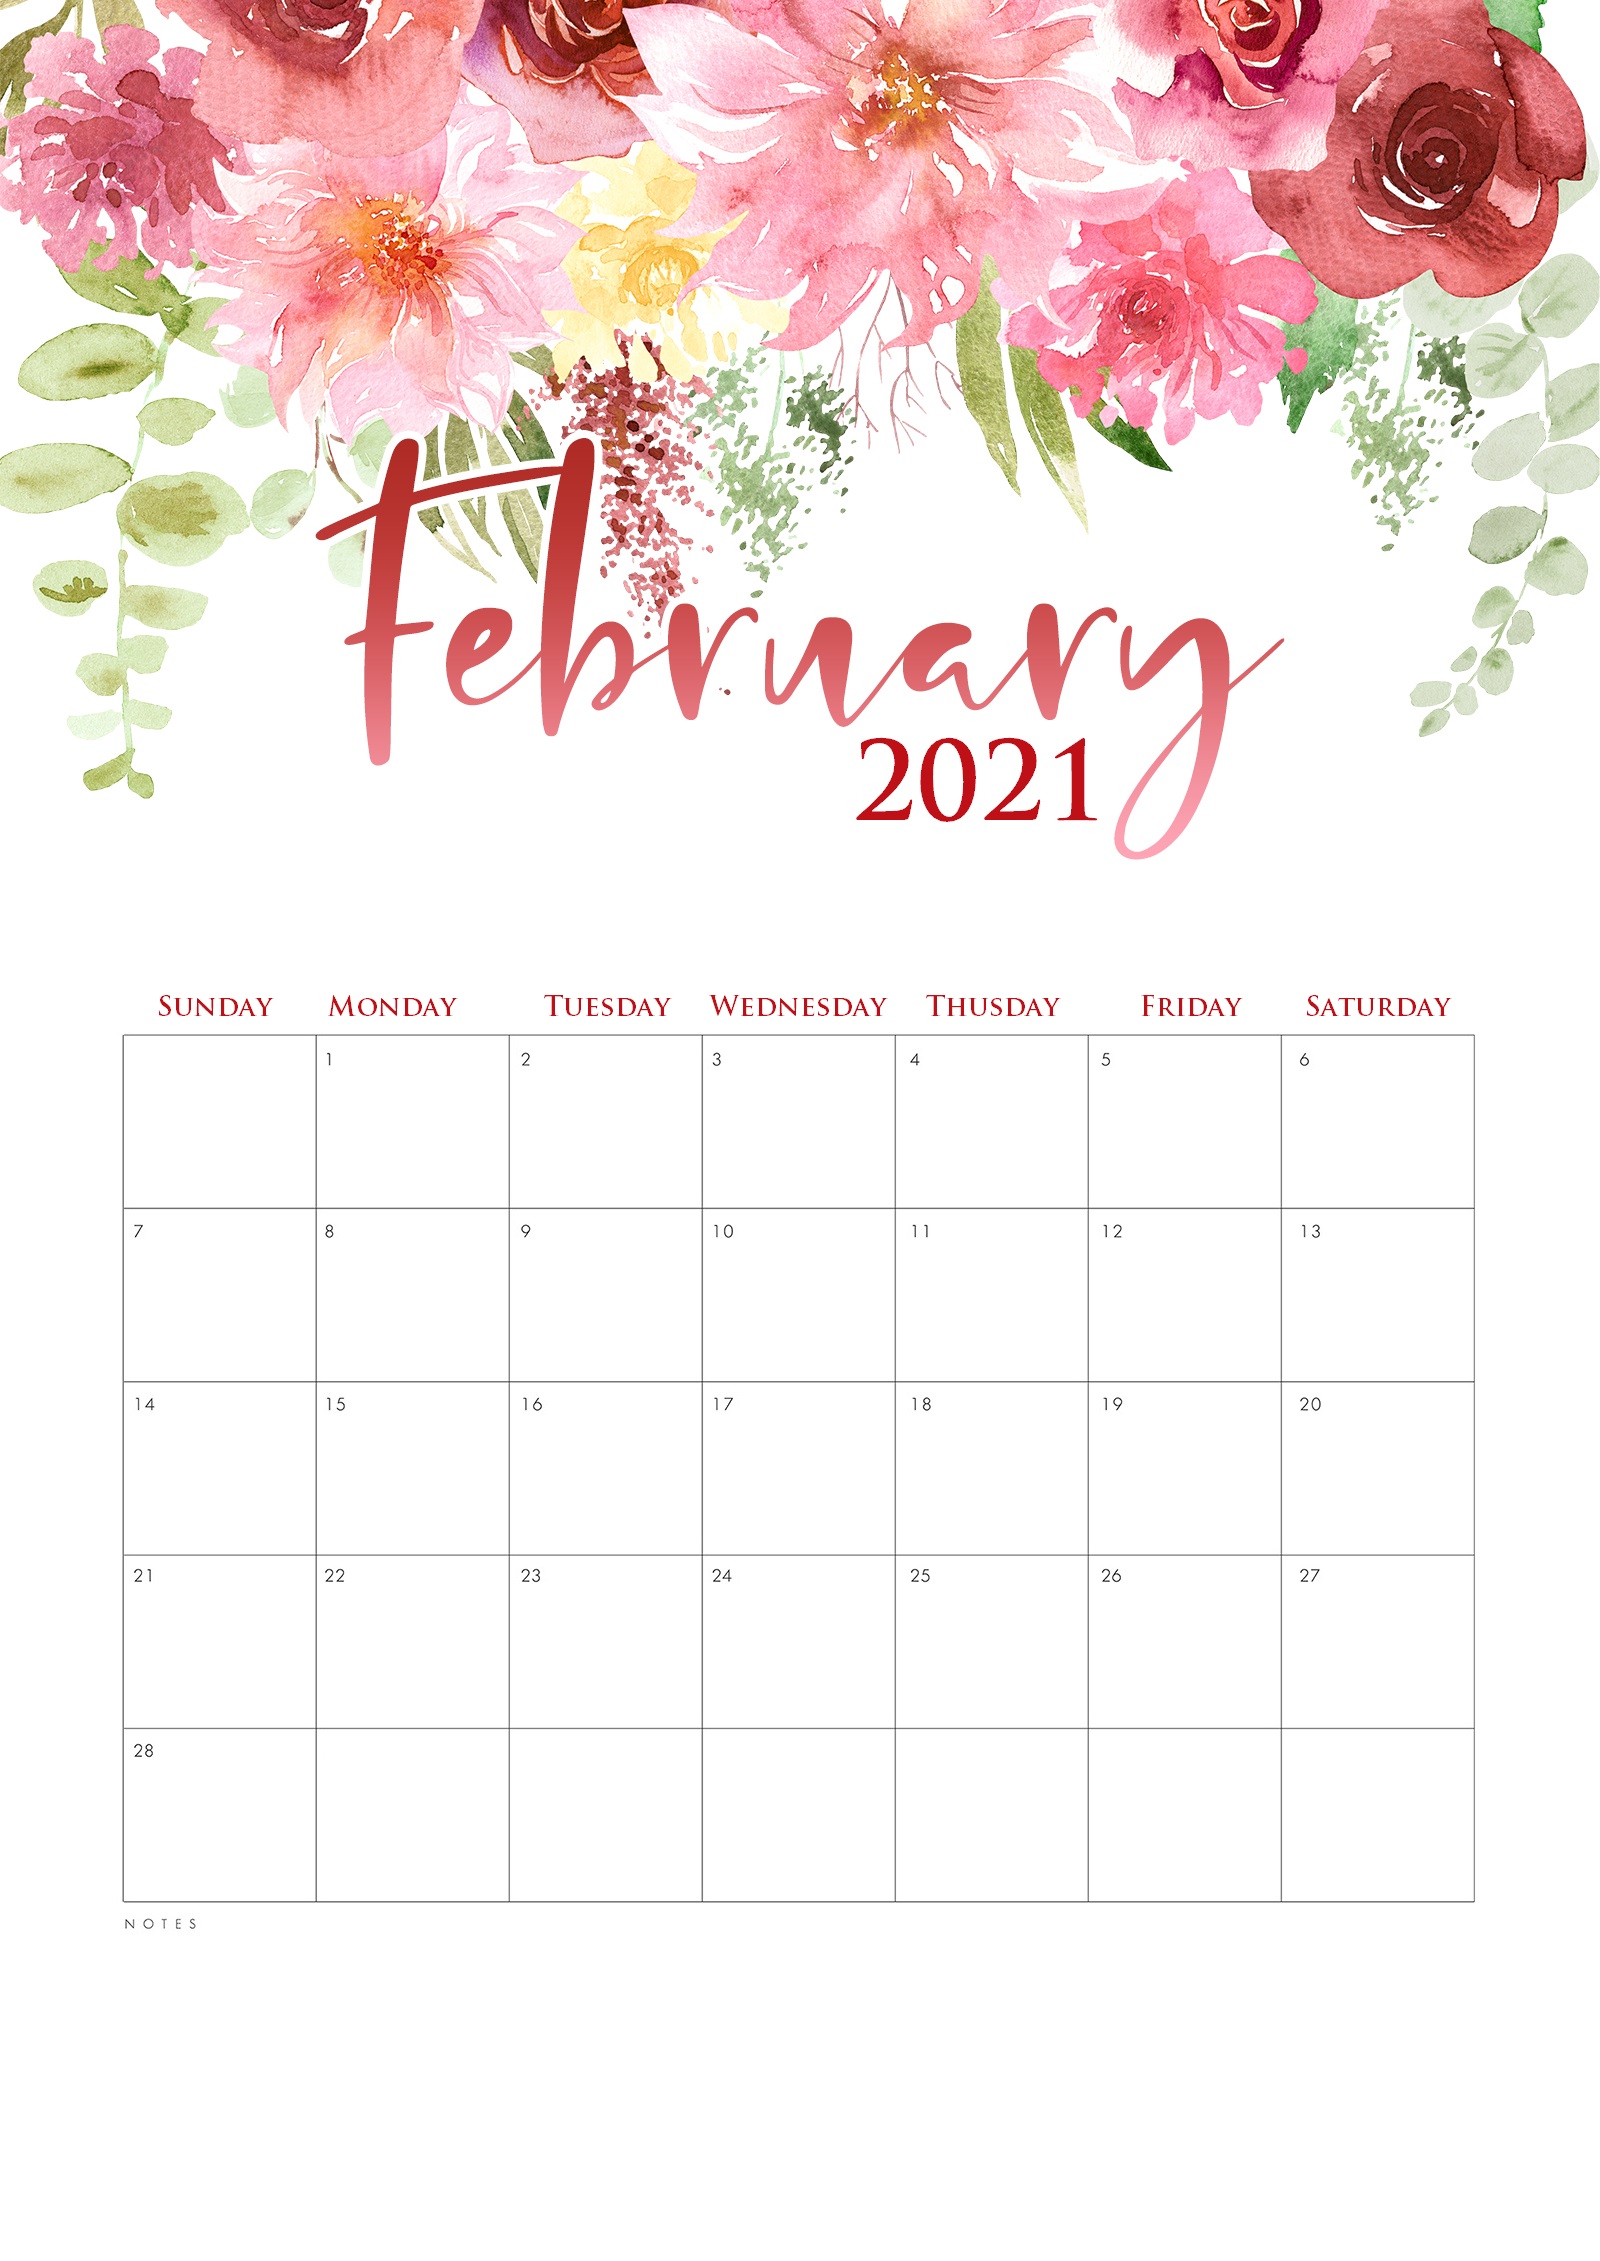 30 Free February 2021 Calendars For Home Or Office Onedesblog Select the paper size of the monthly by clicking on the desired button 30 free february 2021 calendars for